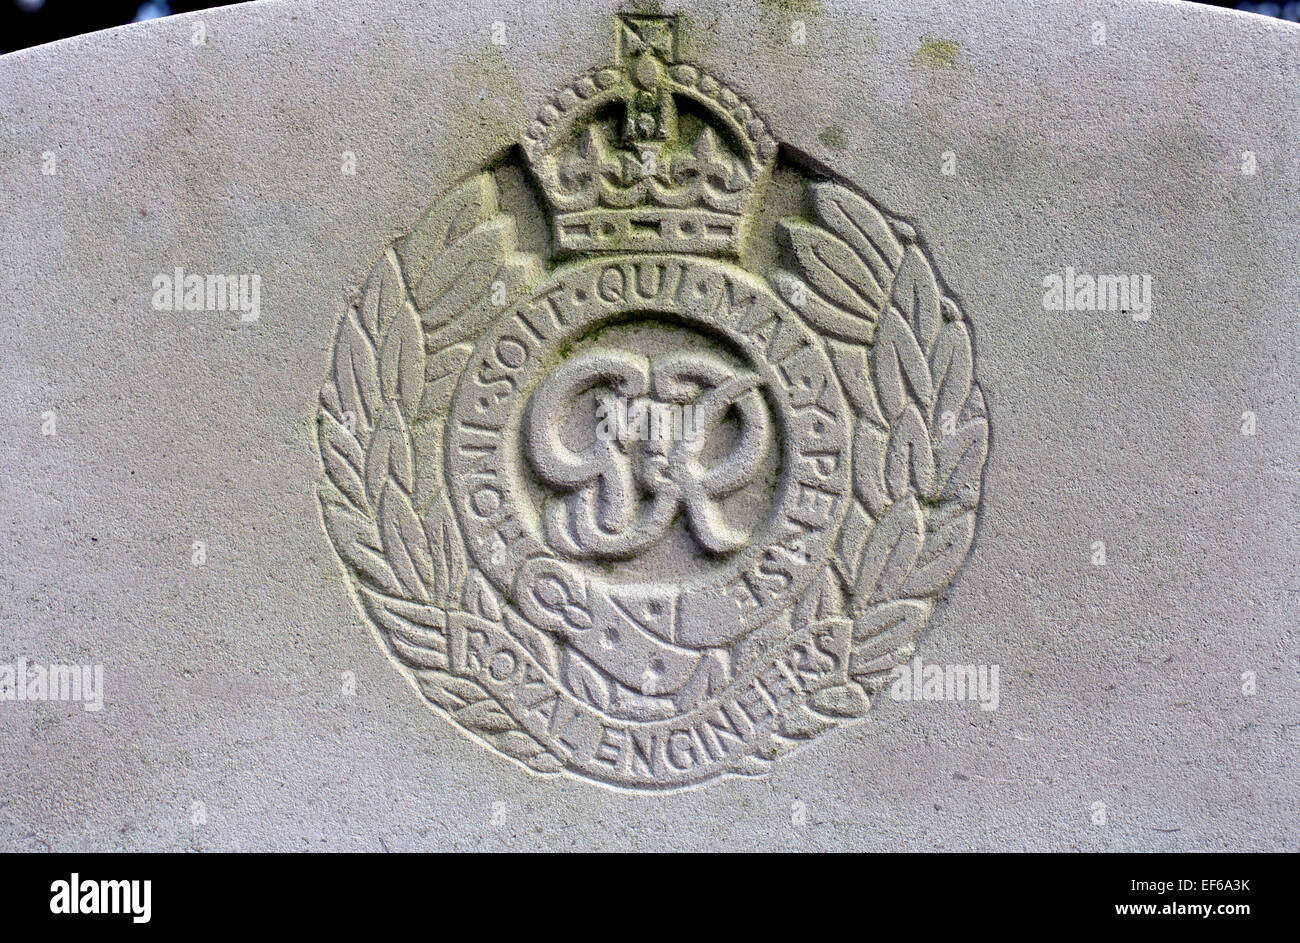 Royal Engineers emblem on a war grave Stock Photo